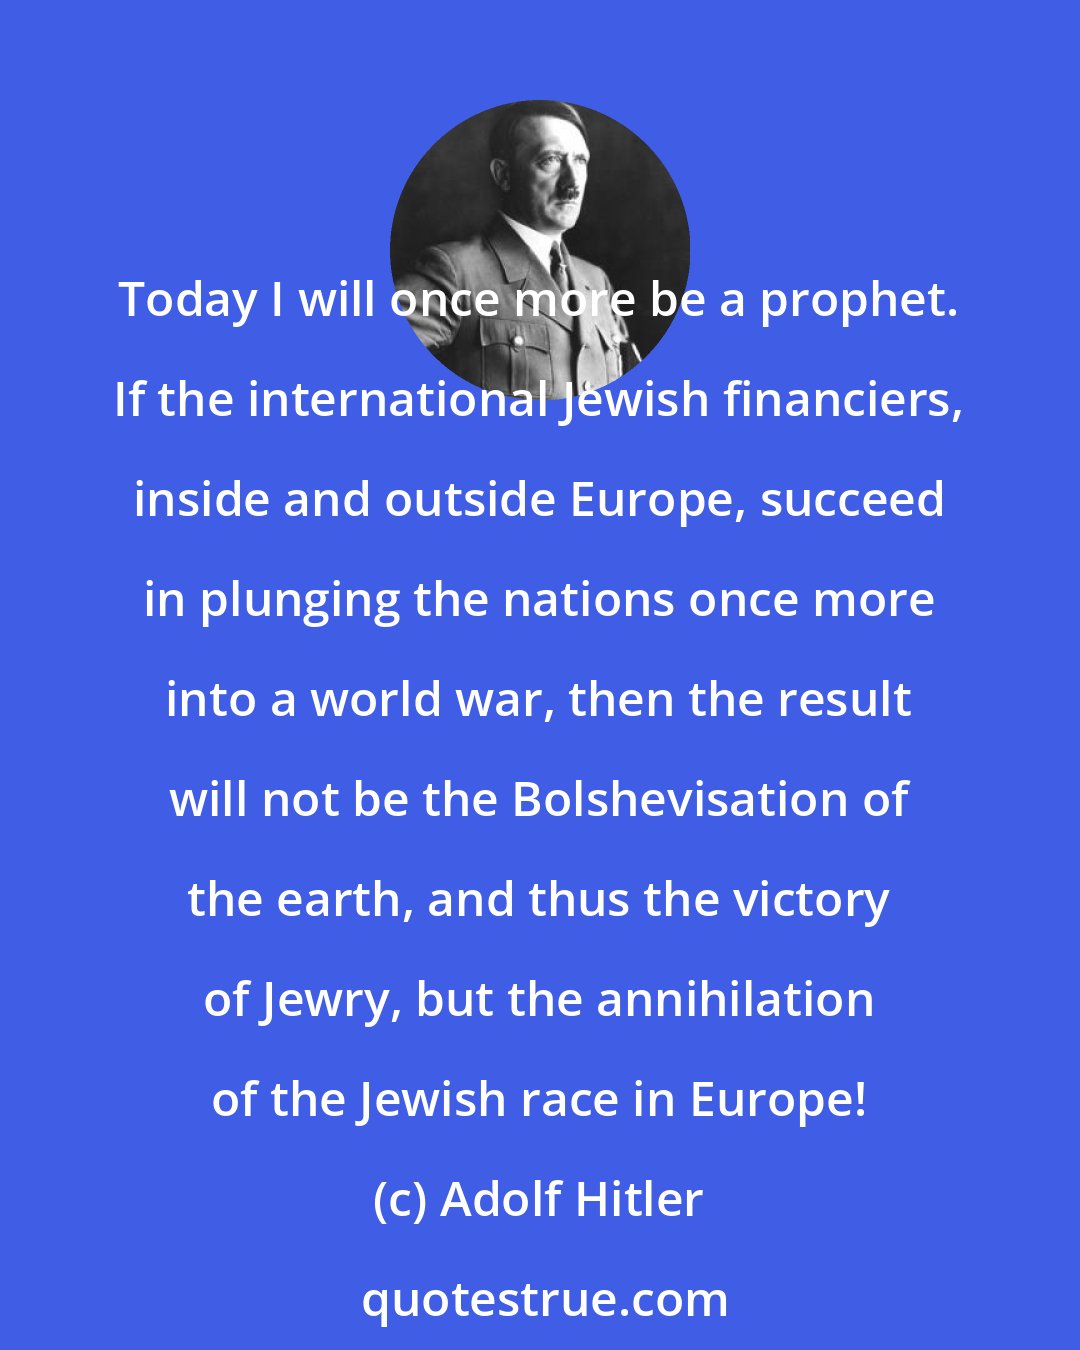 Adolf Hitler: Today I will once more be a prophet. If the international Jewish financiers, inside and outside Europe, succeed in plunging the nations once more into a world war, then the result will not be the Bolshevisation of the earth, and thus the victory of Jewry, but the annihilation of the Jewish race in Europe!